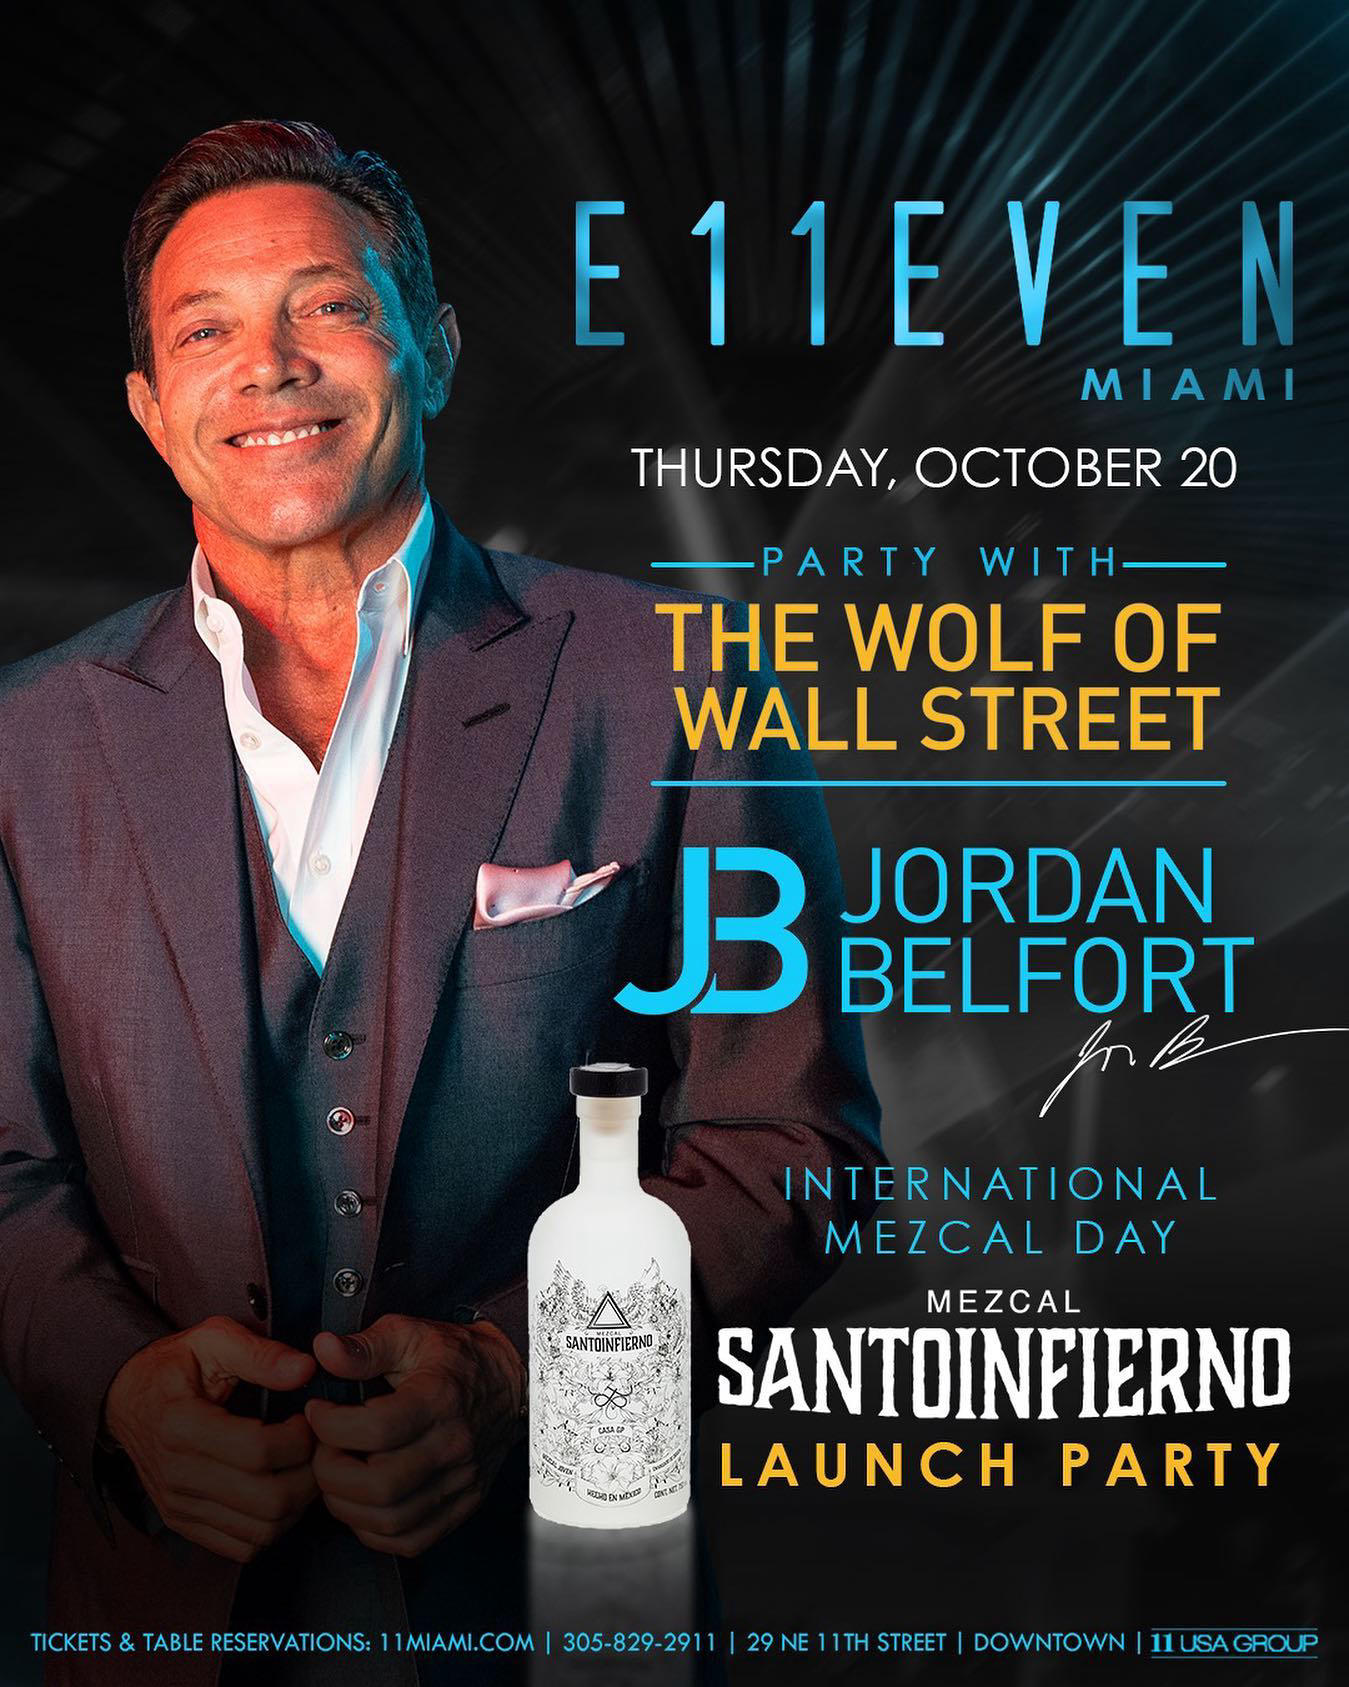 Jordan Belfort - Come party with me, The Real Wolf of Wall Street, this Thursday in Miami